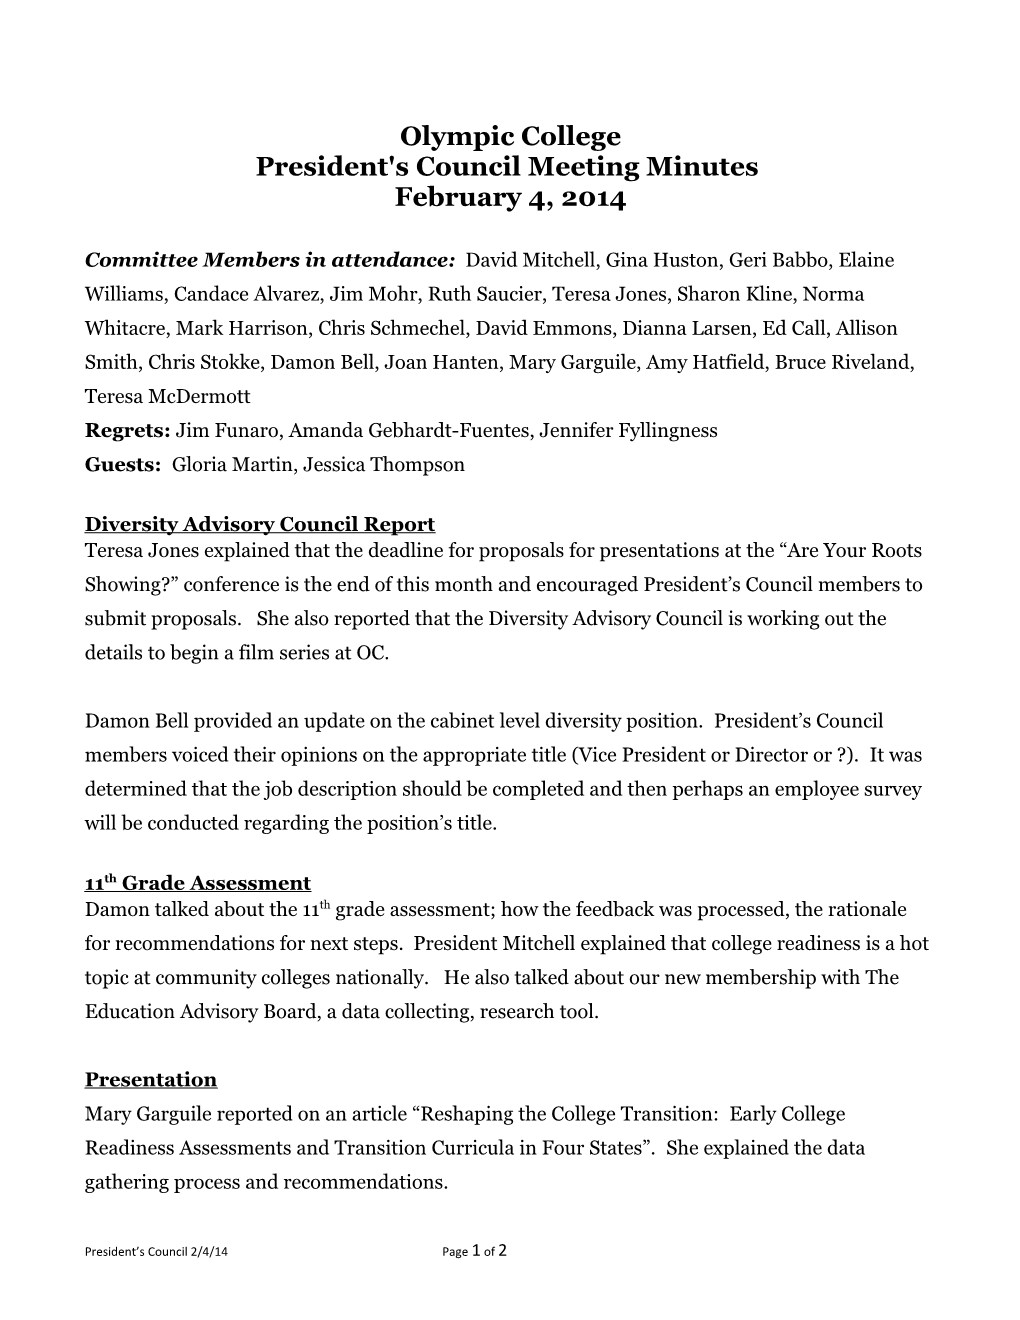 President's Council Meeting Minutes